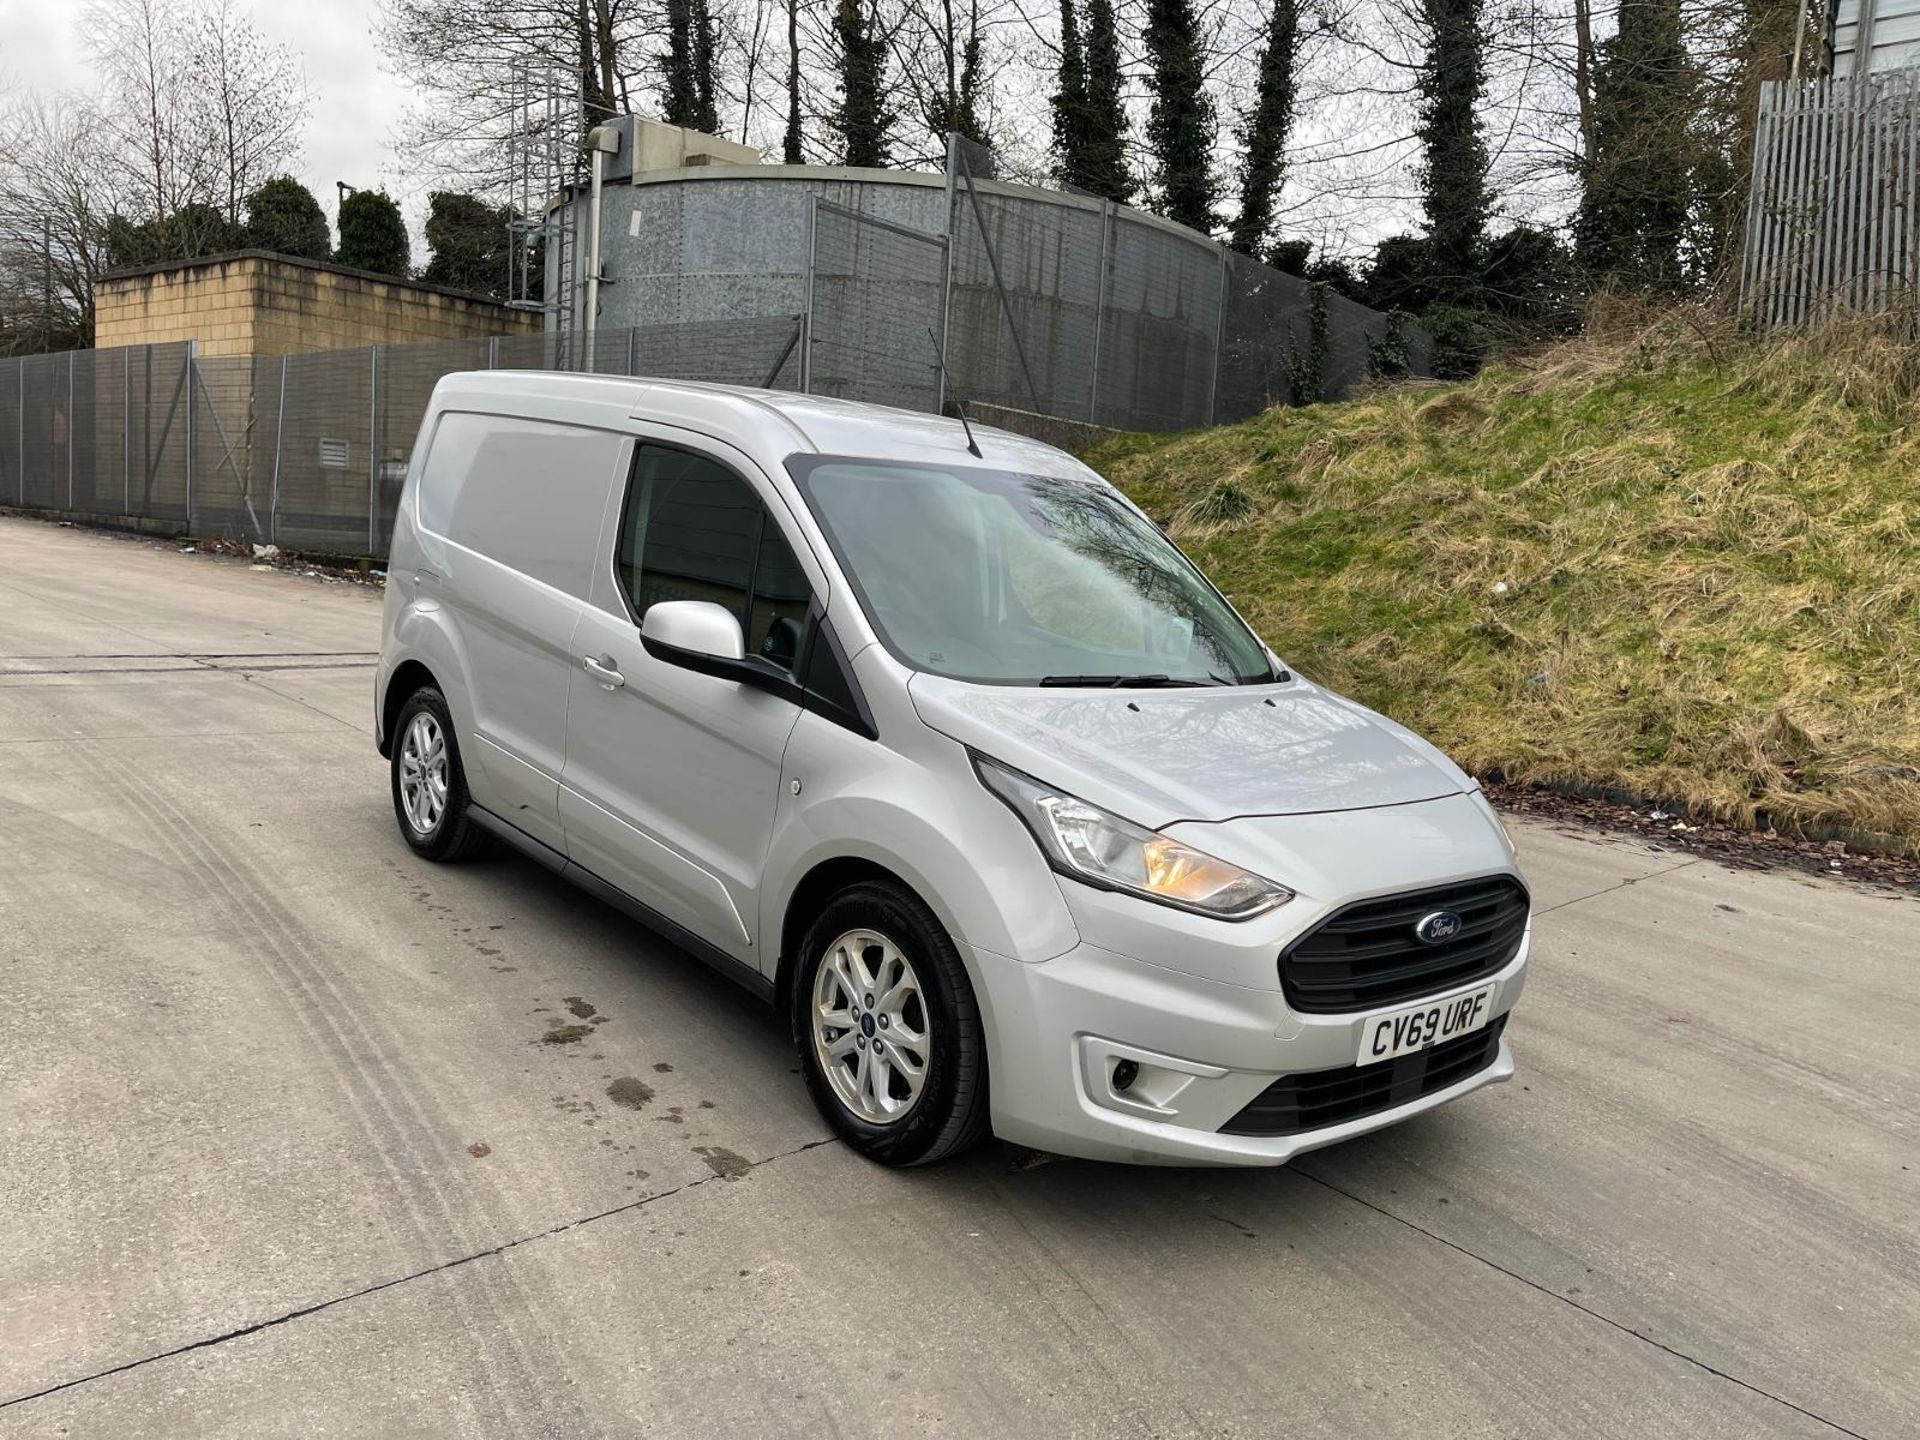 2019 FORD TRANSIT CONNECT LIMITED: POWERFUL 1.5 TDCI DIESEL - Image 2 of 12